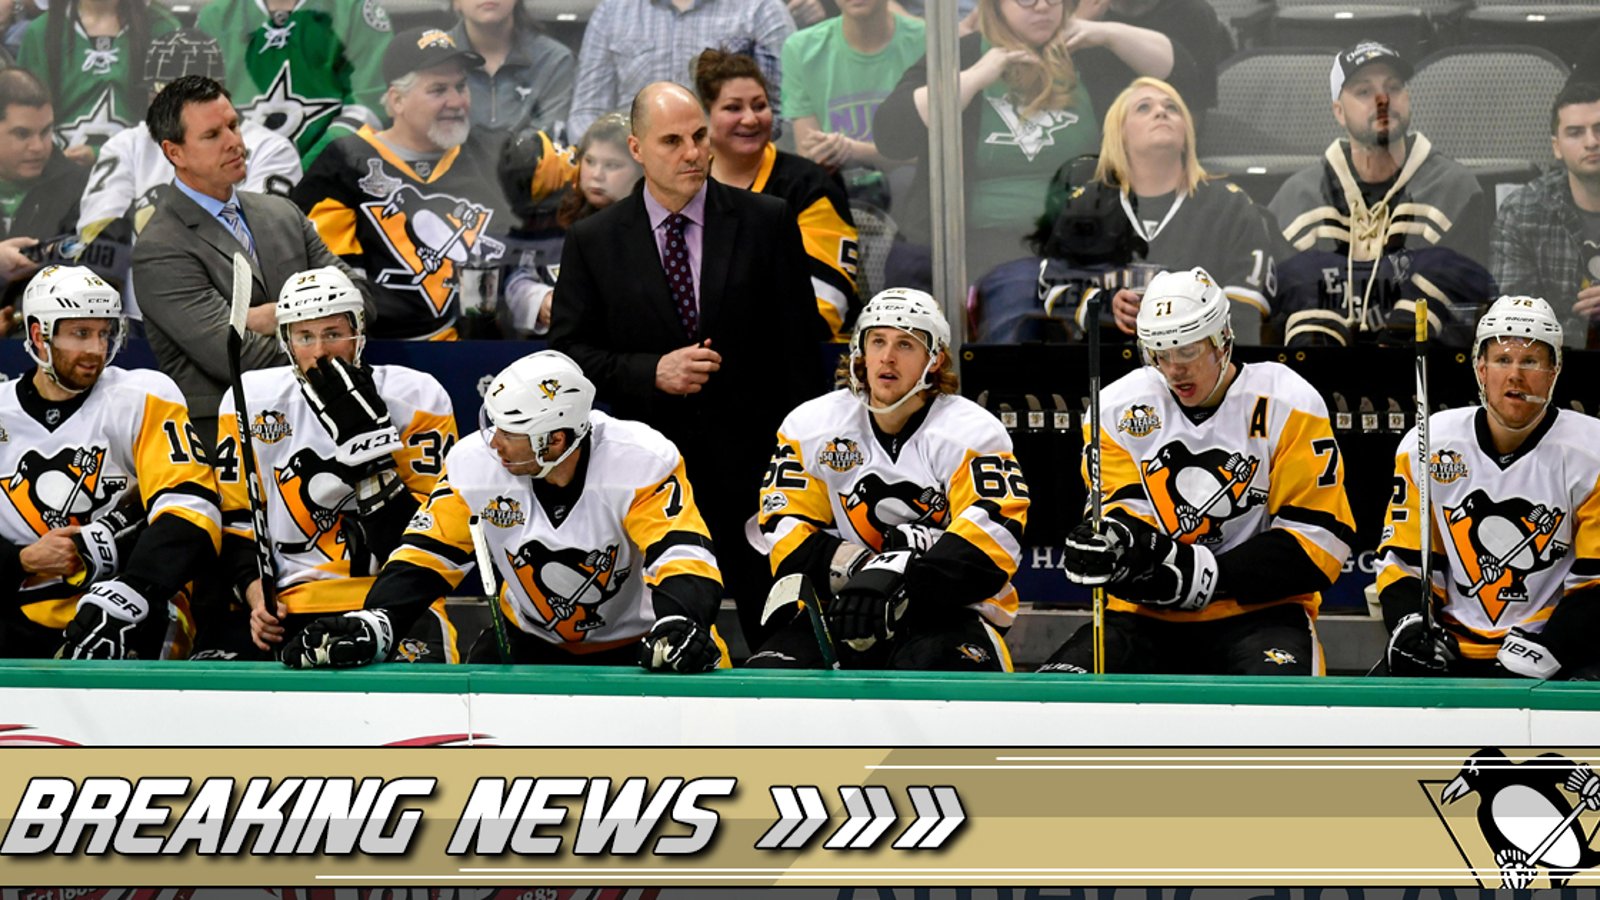 BREAKING: Two KEY players back in the Pens lineup tonight?